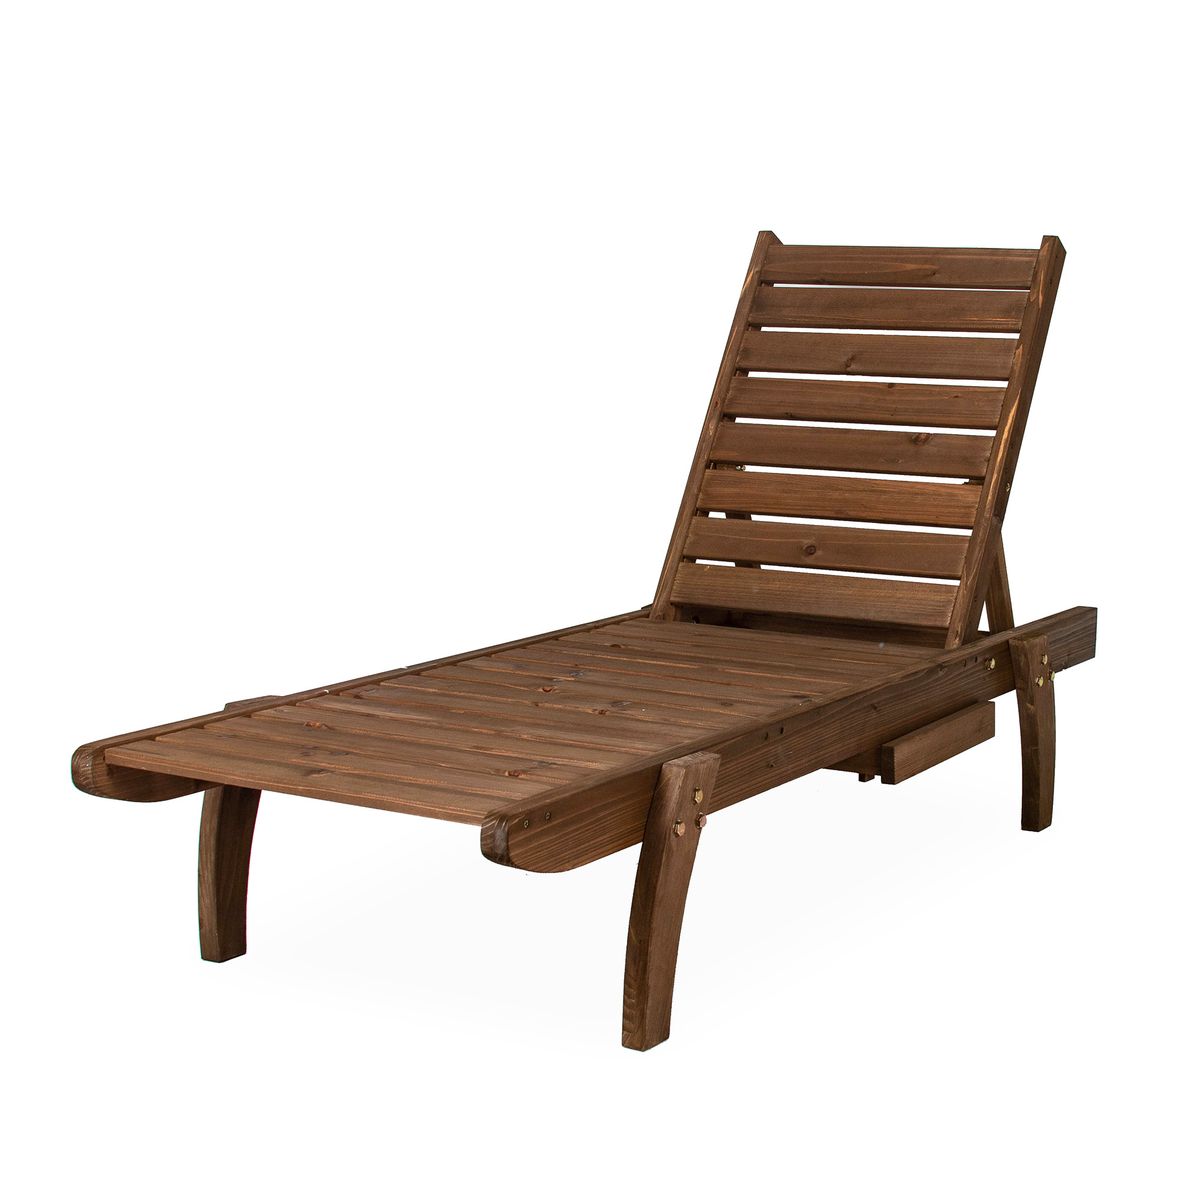 Hazlo Wooden Outdoor Sun Pool Lounger Chair &amp; Pull out Tray - Brown